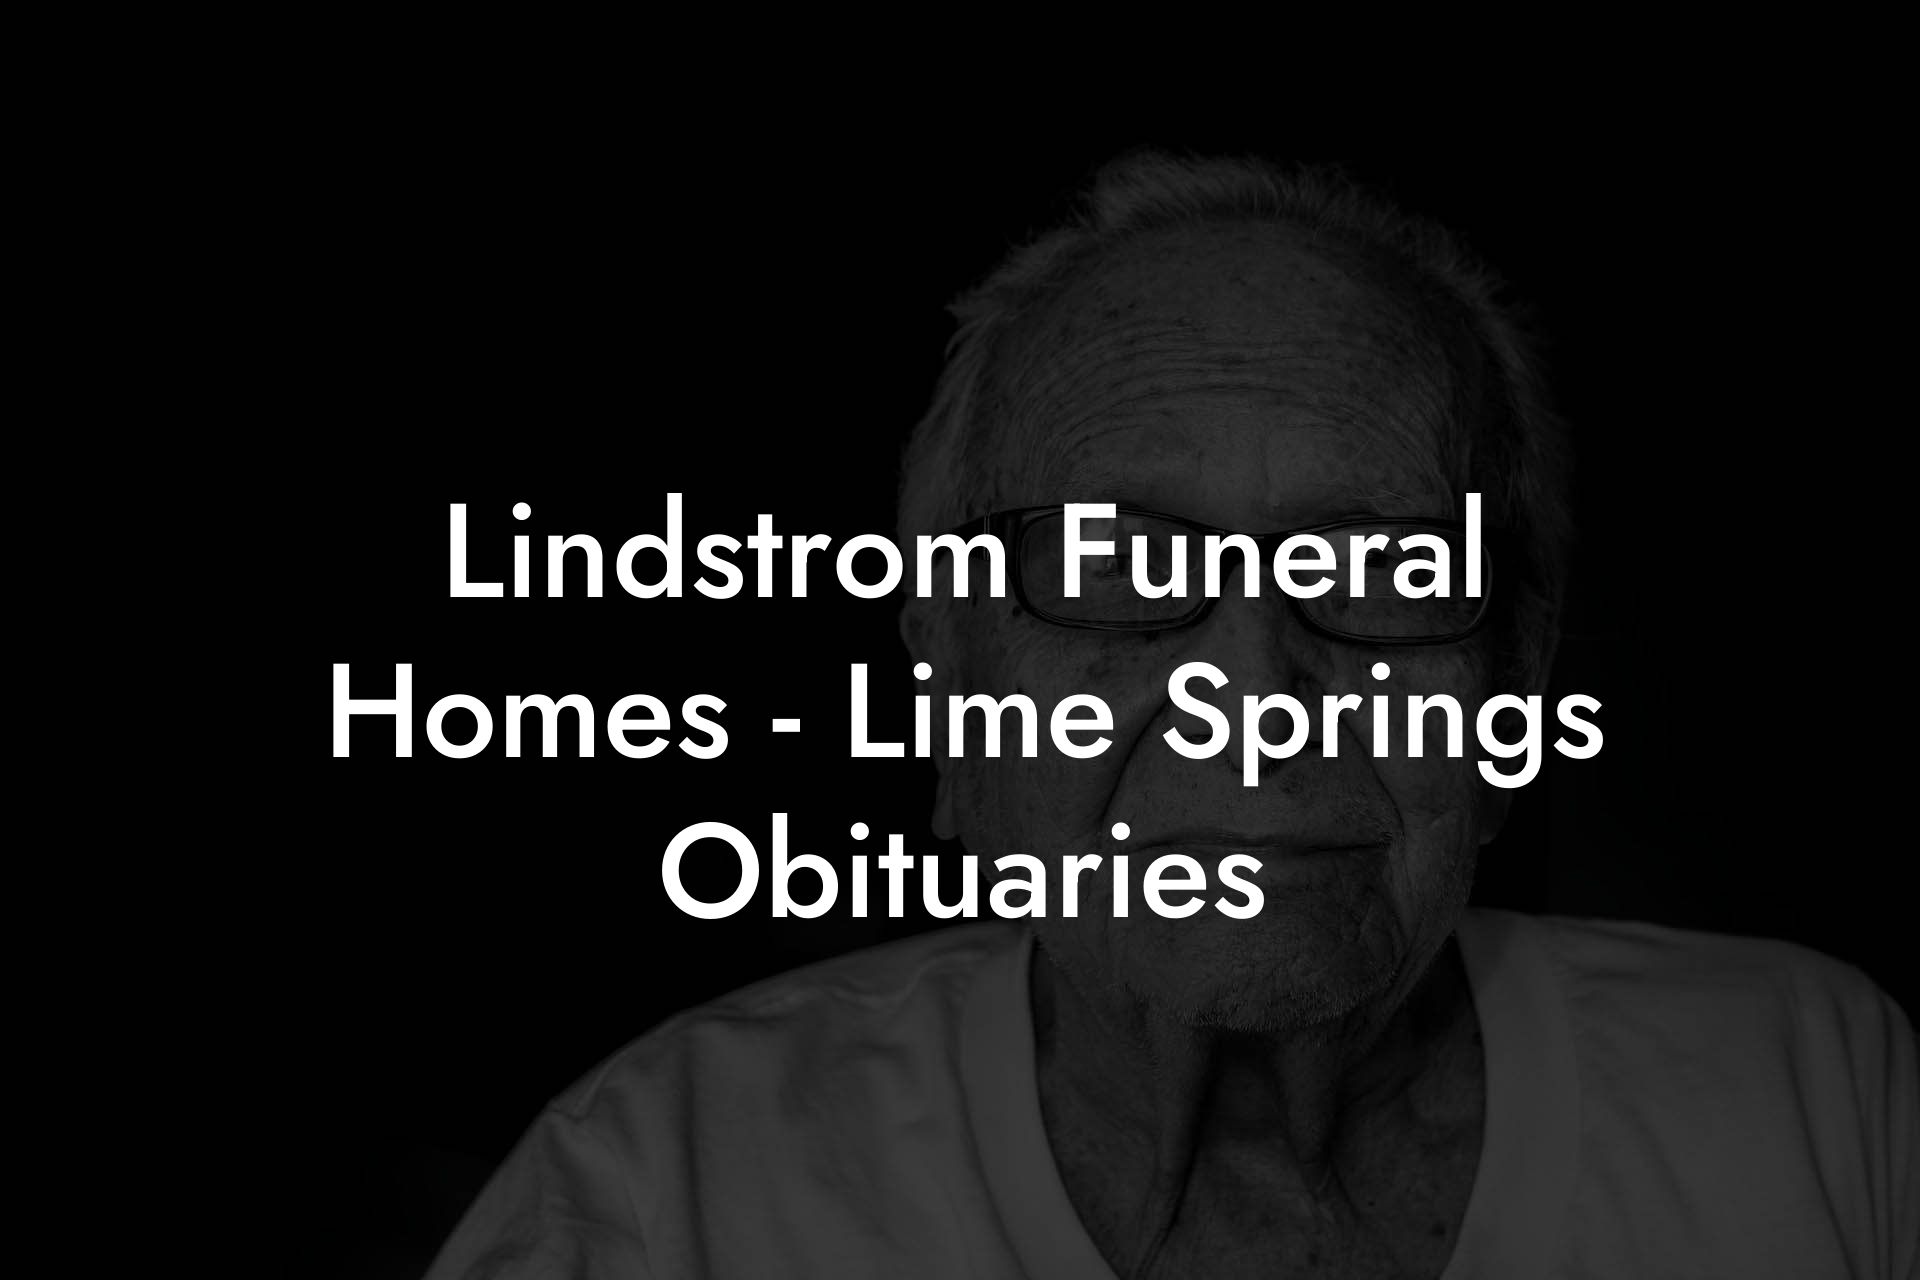 Lindstrom Funeral Homes - Lime Springs Obituaries